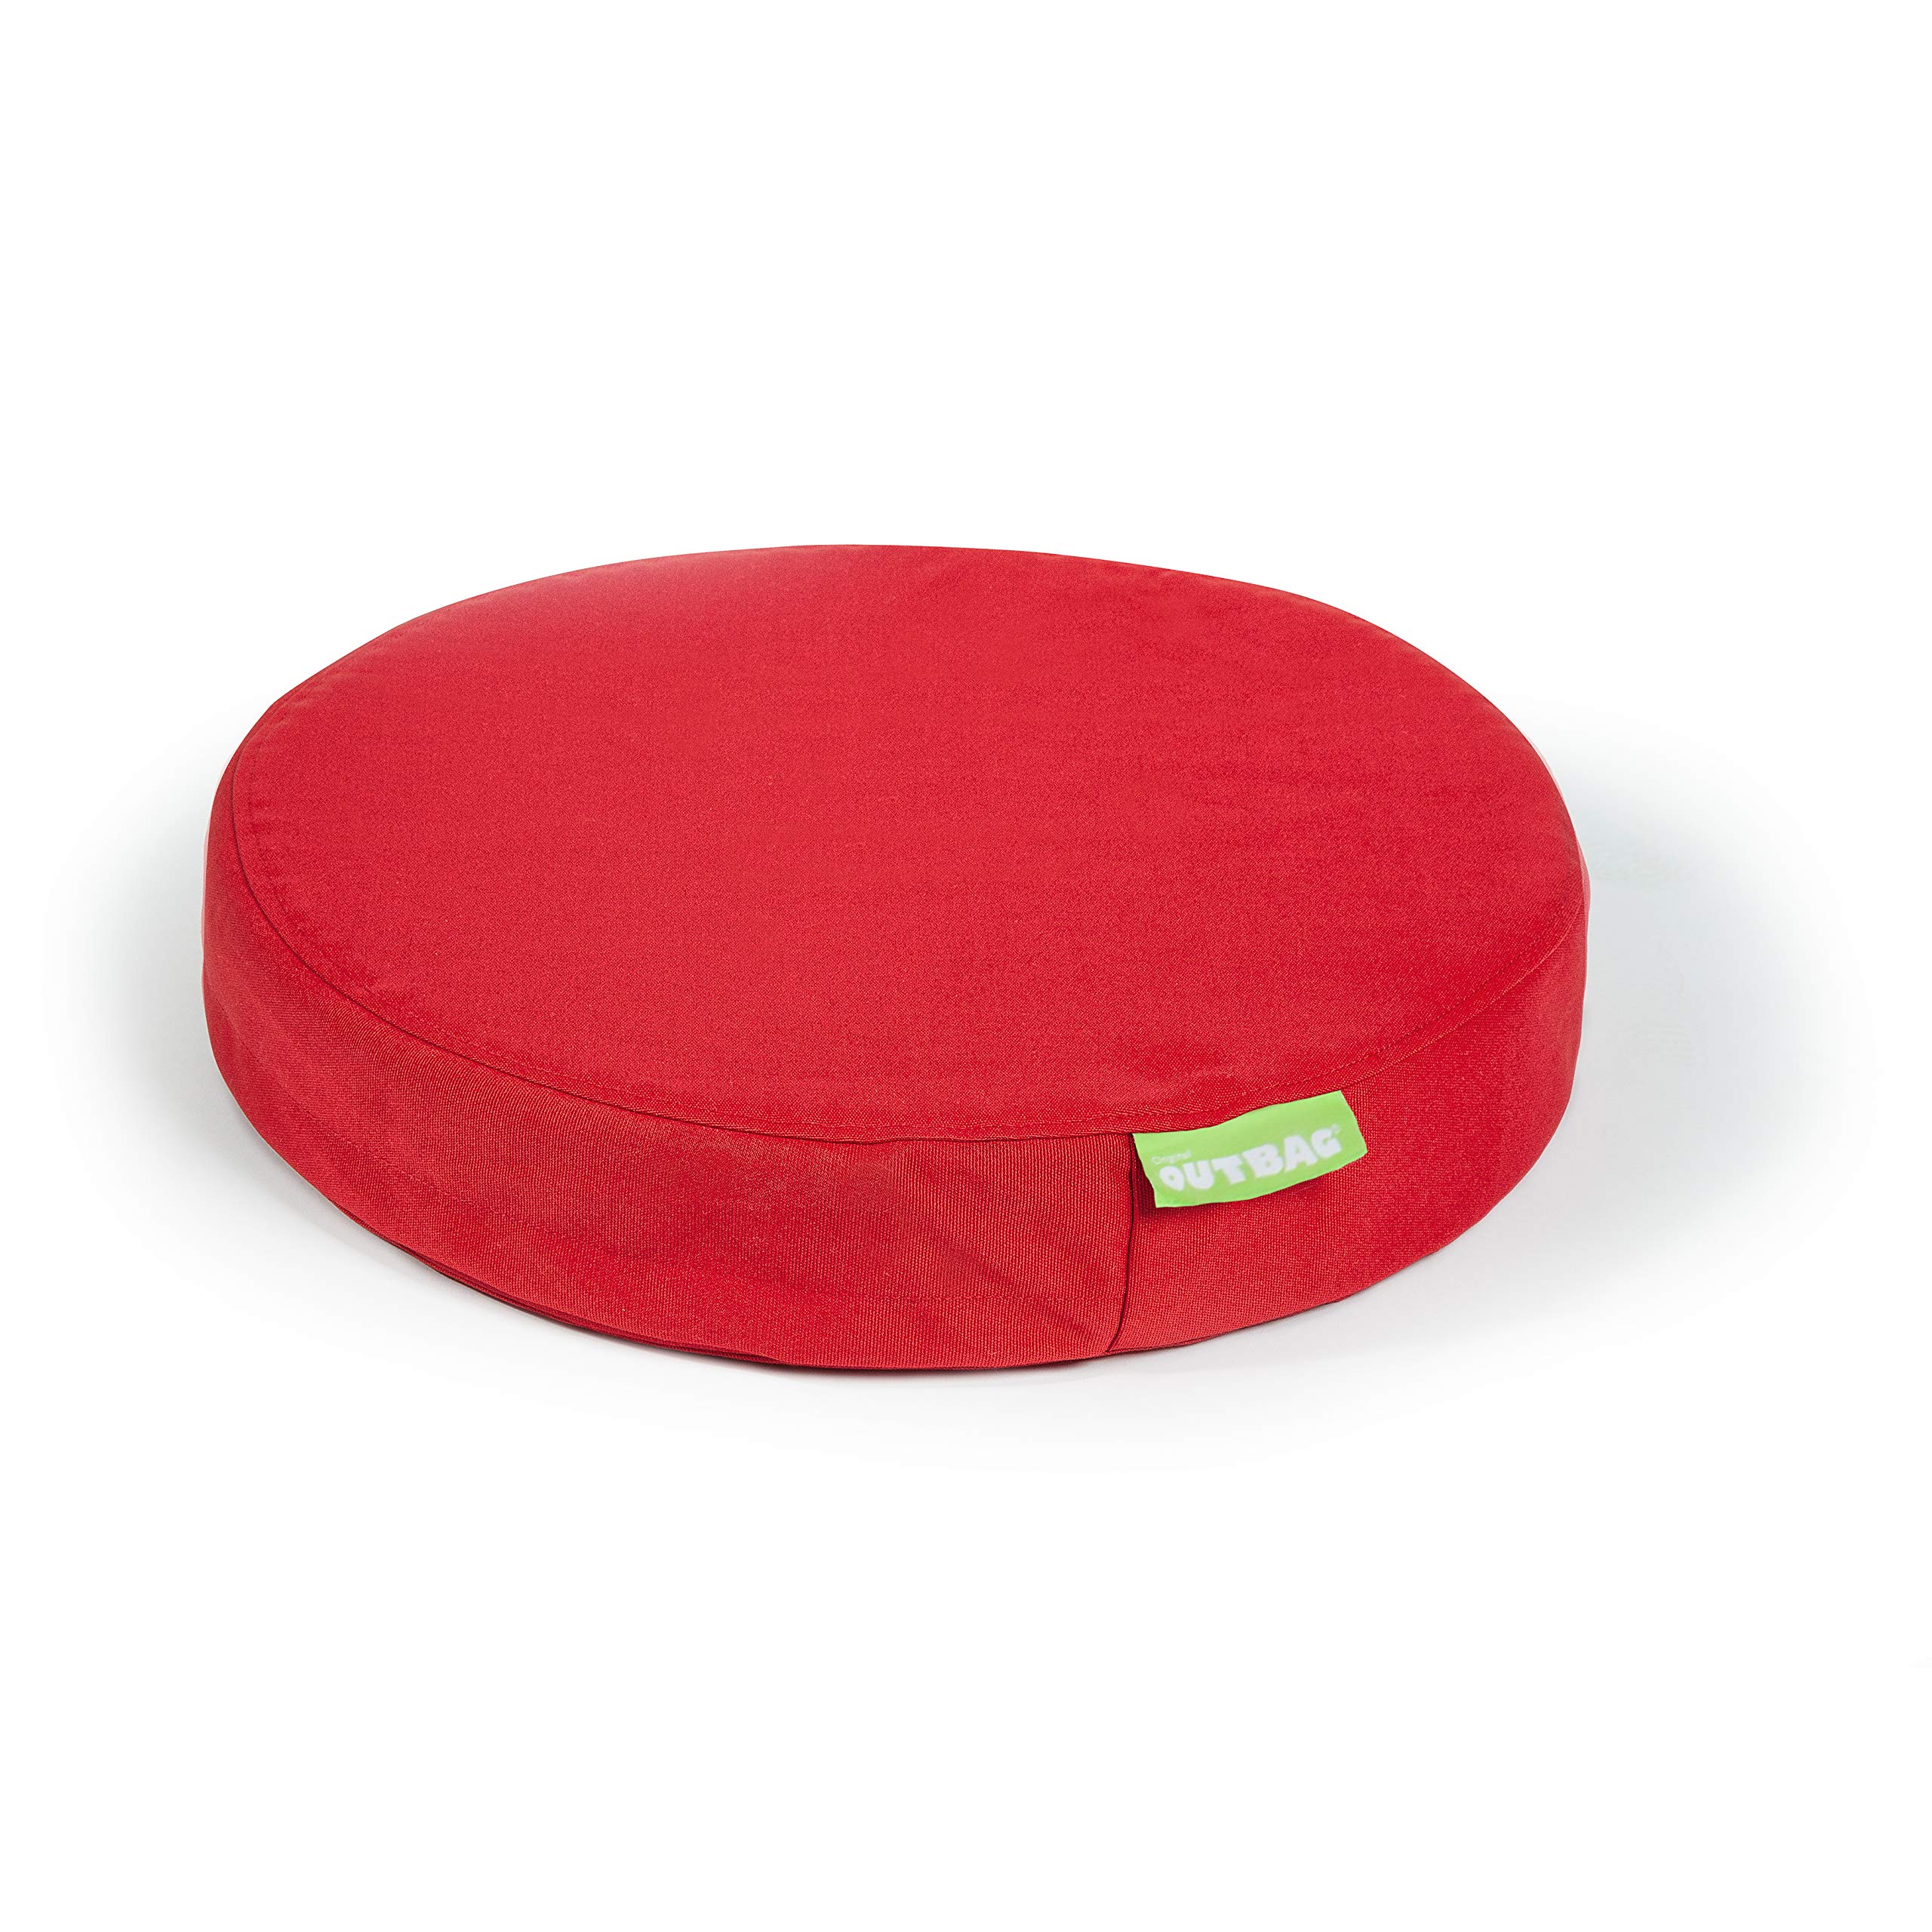 Outbag Disc Outdoorauflage, Rot